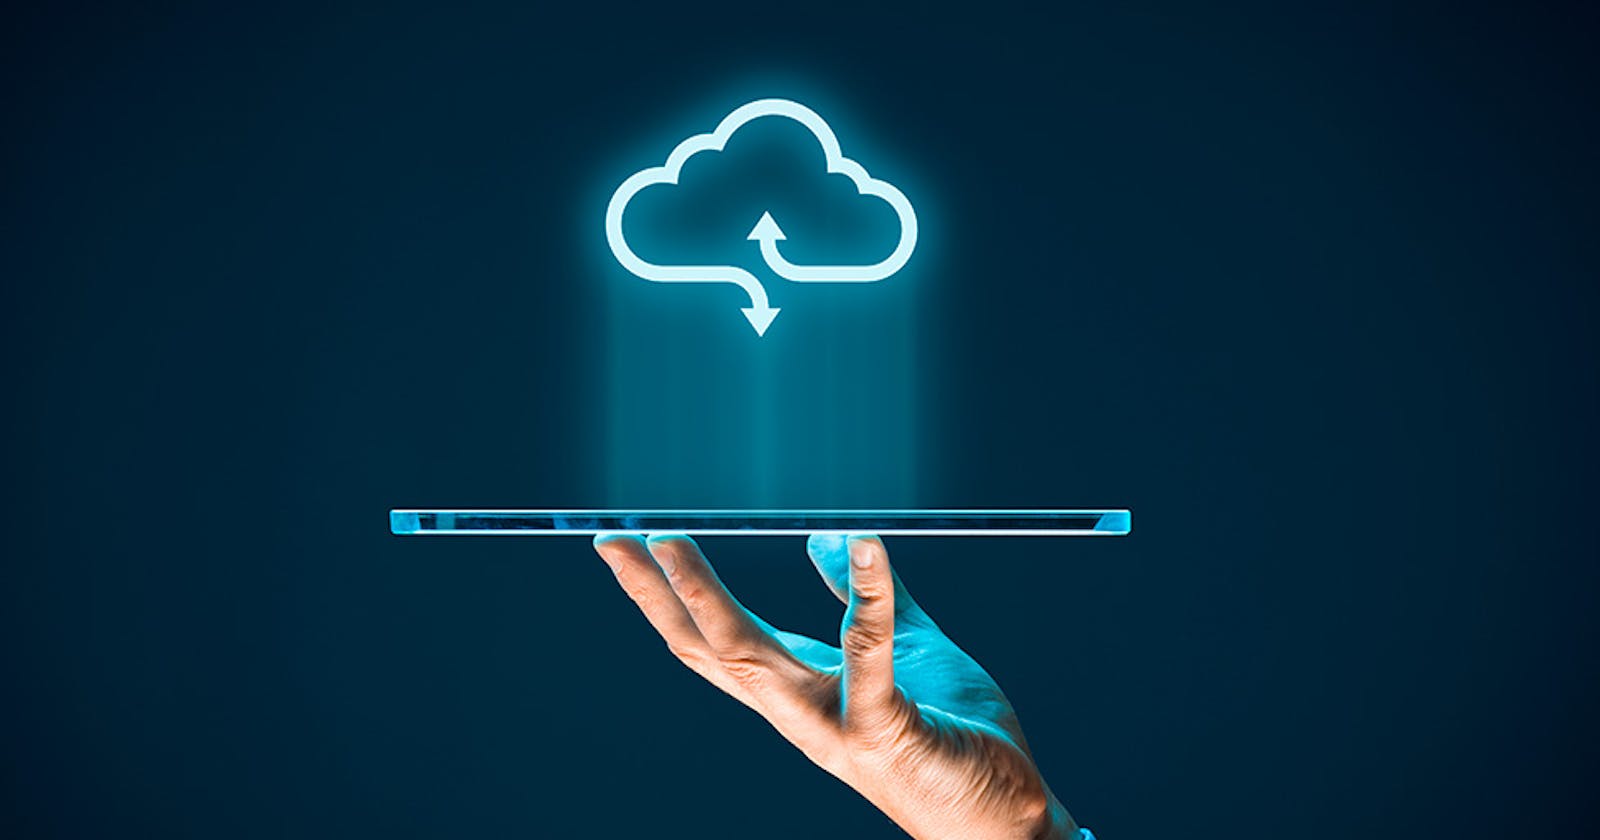 7 Cloud Services for Small Businesses in 2023